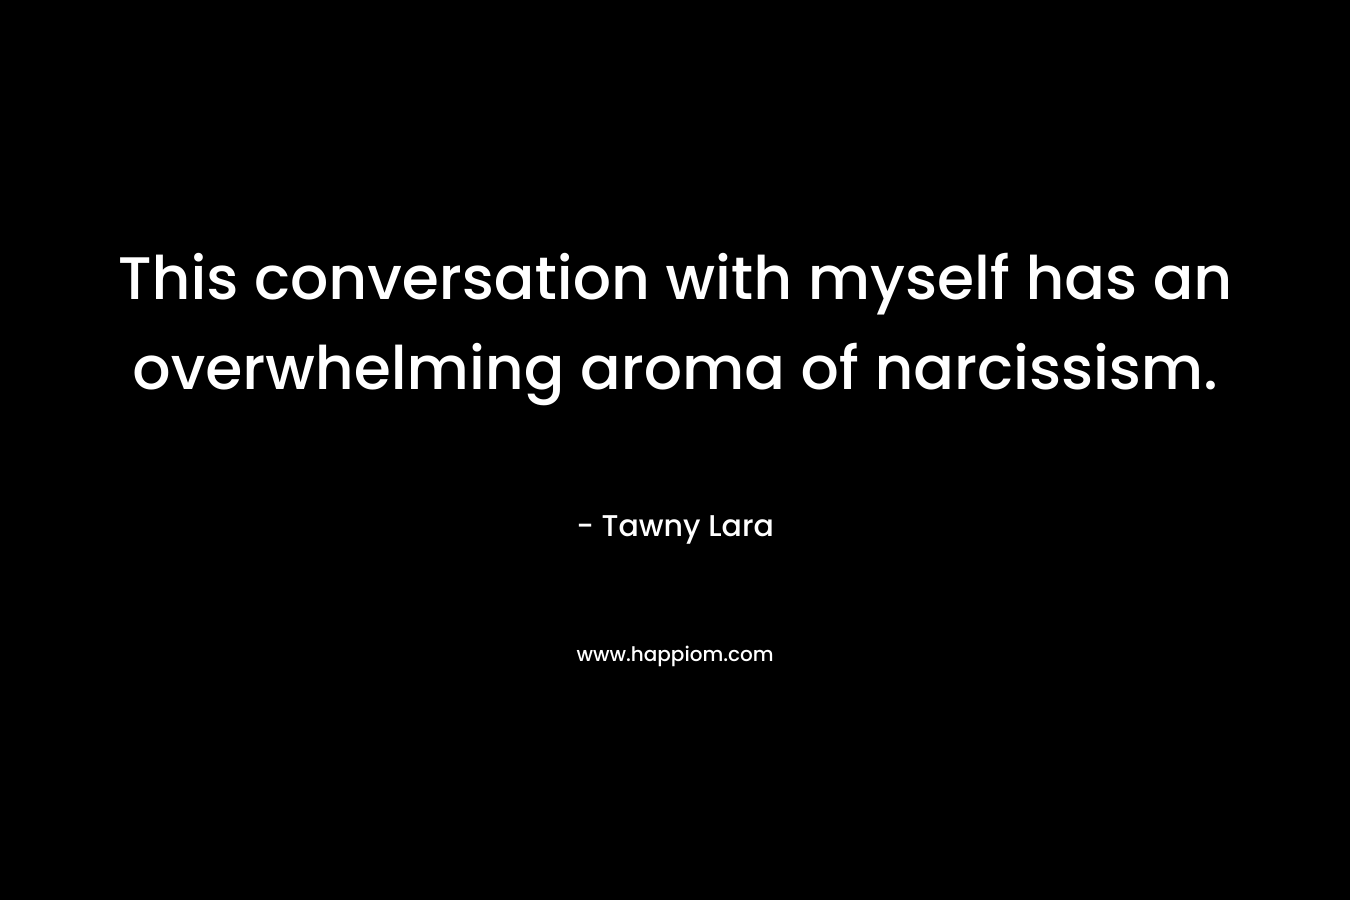 This conversation with myself has an overwhelming aroma of narcissism. – Tawny Lara